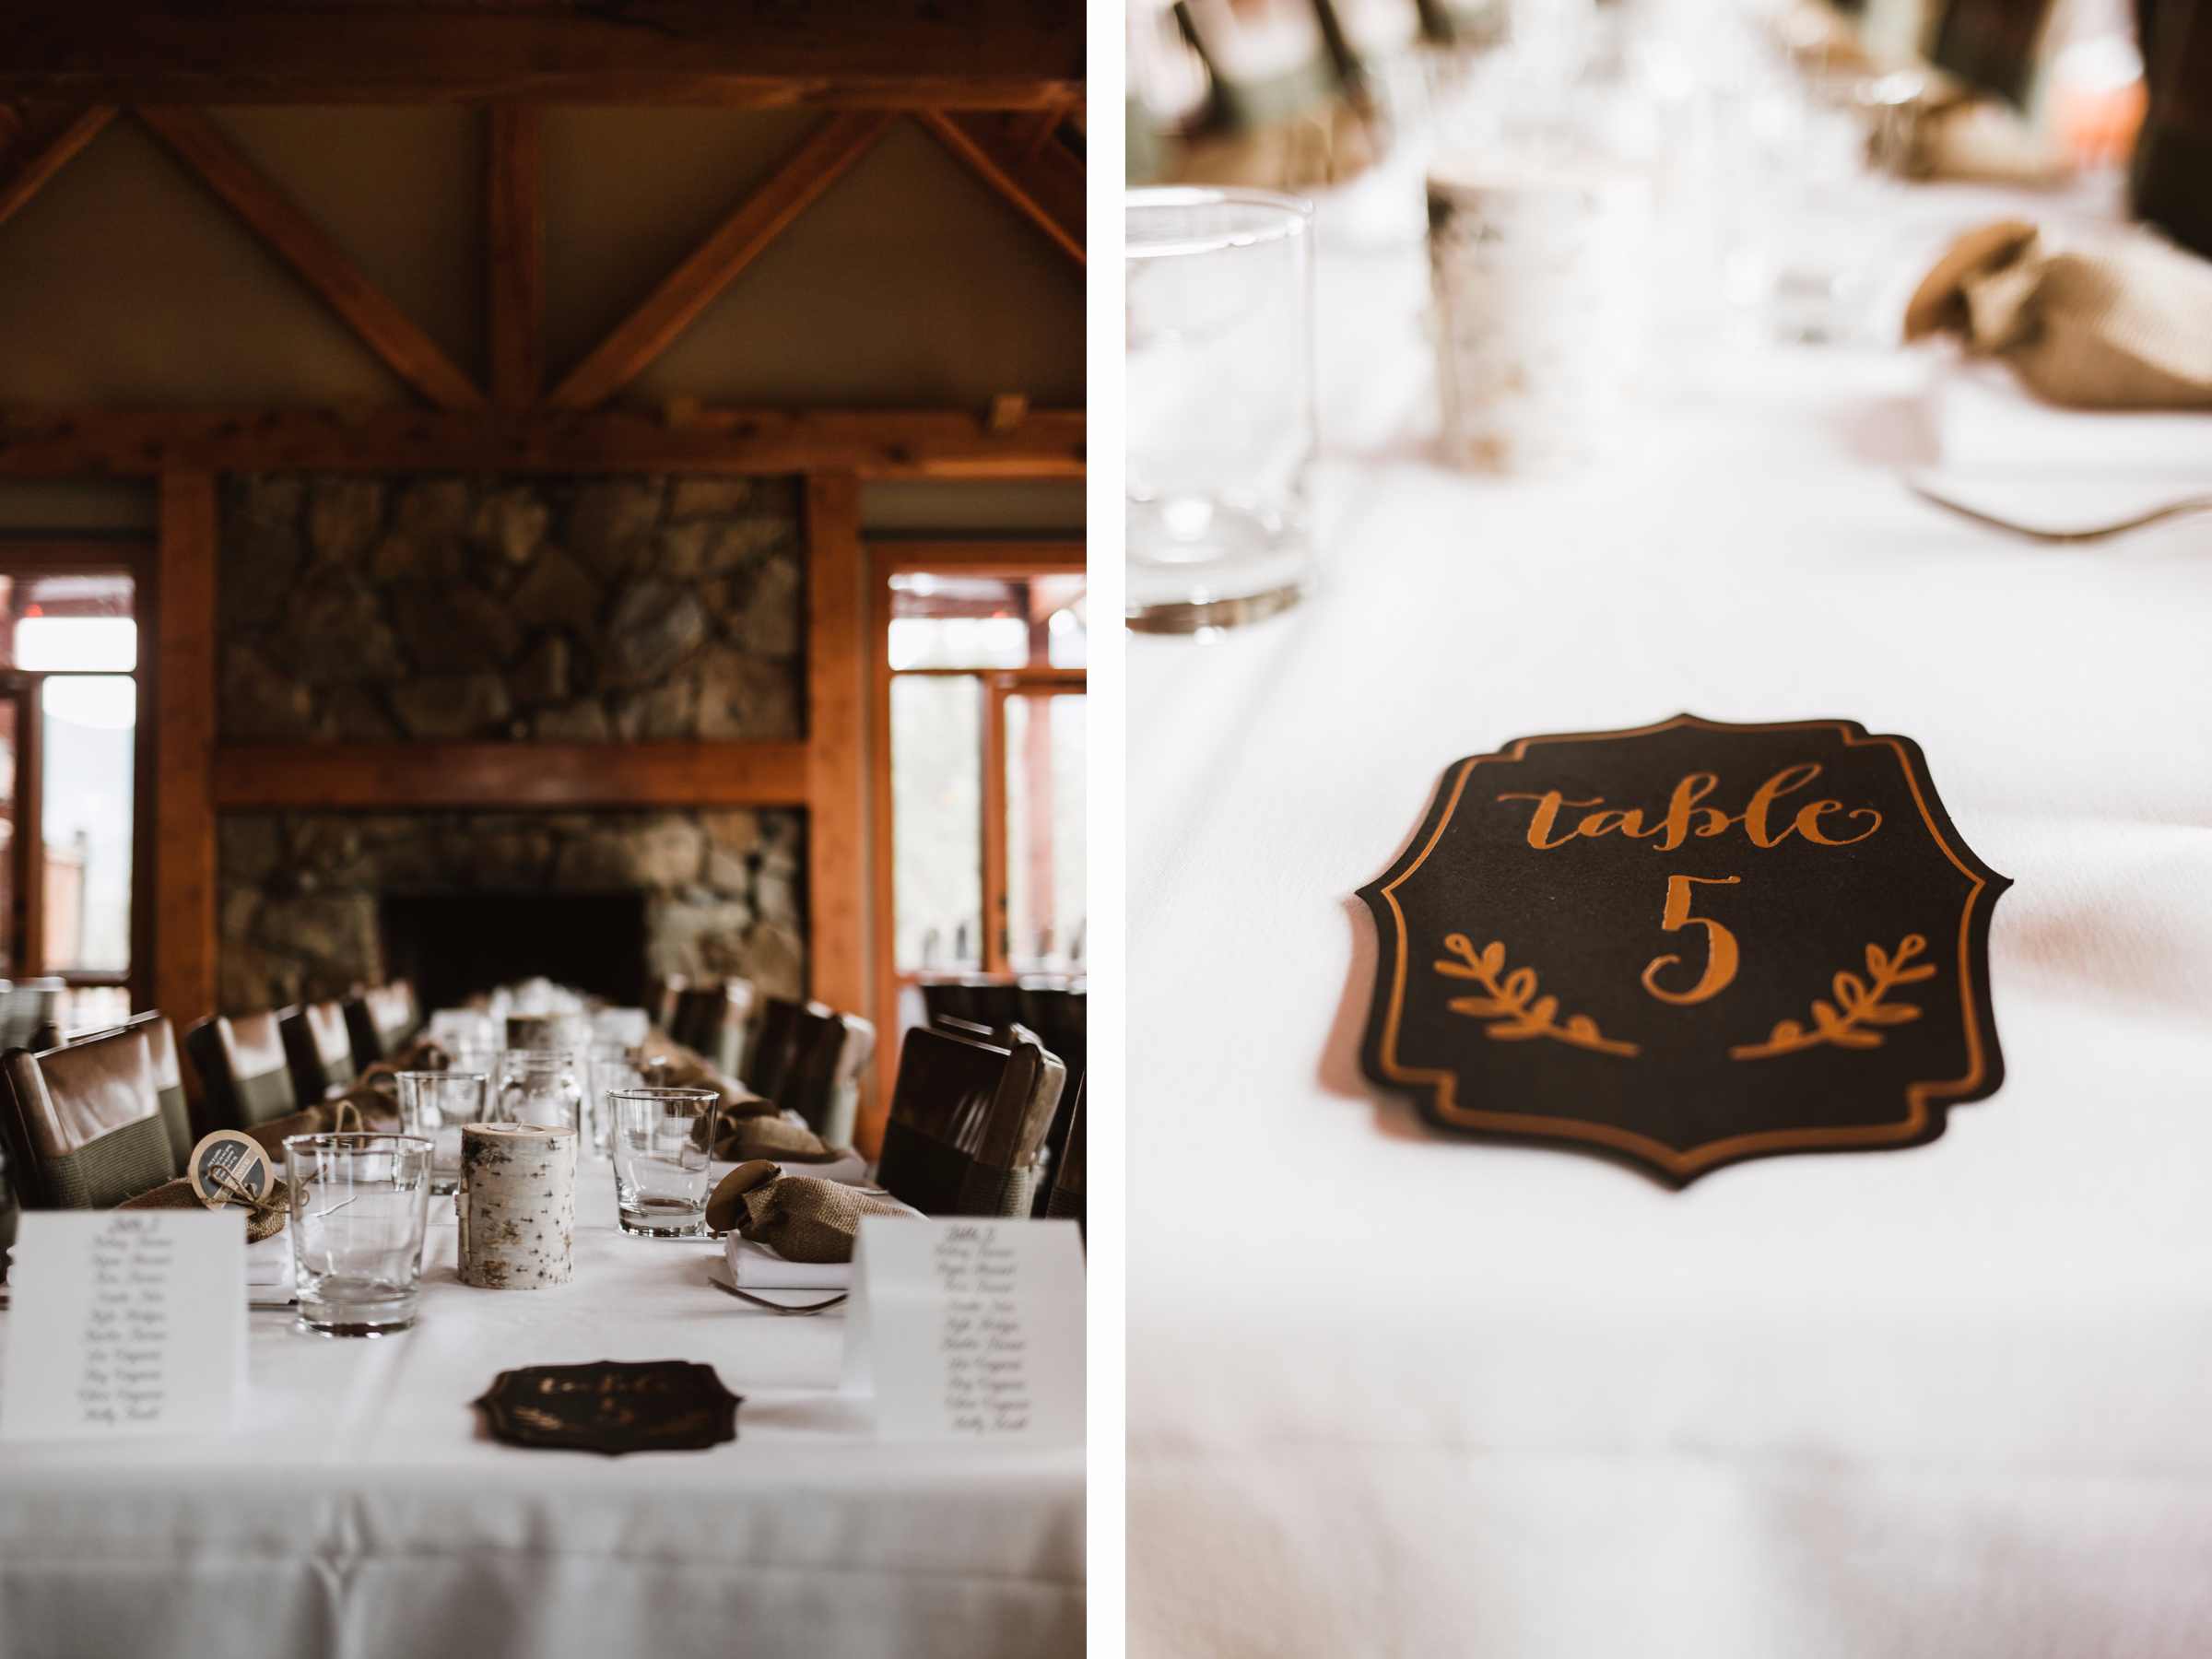 Calgary wedding photographer in Invermere for adventurous mountain destination elopement at Eagle Ranch Golf Resort, British Columbia - Image 40